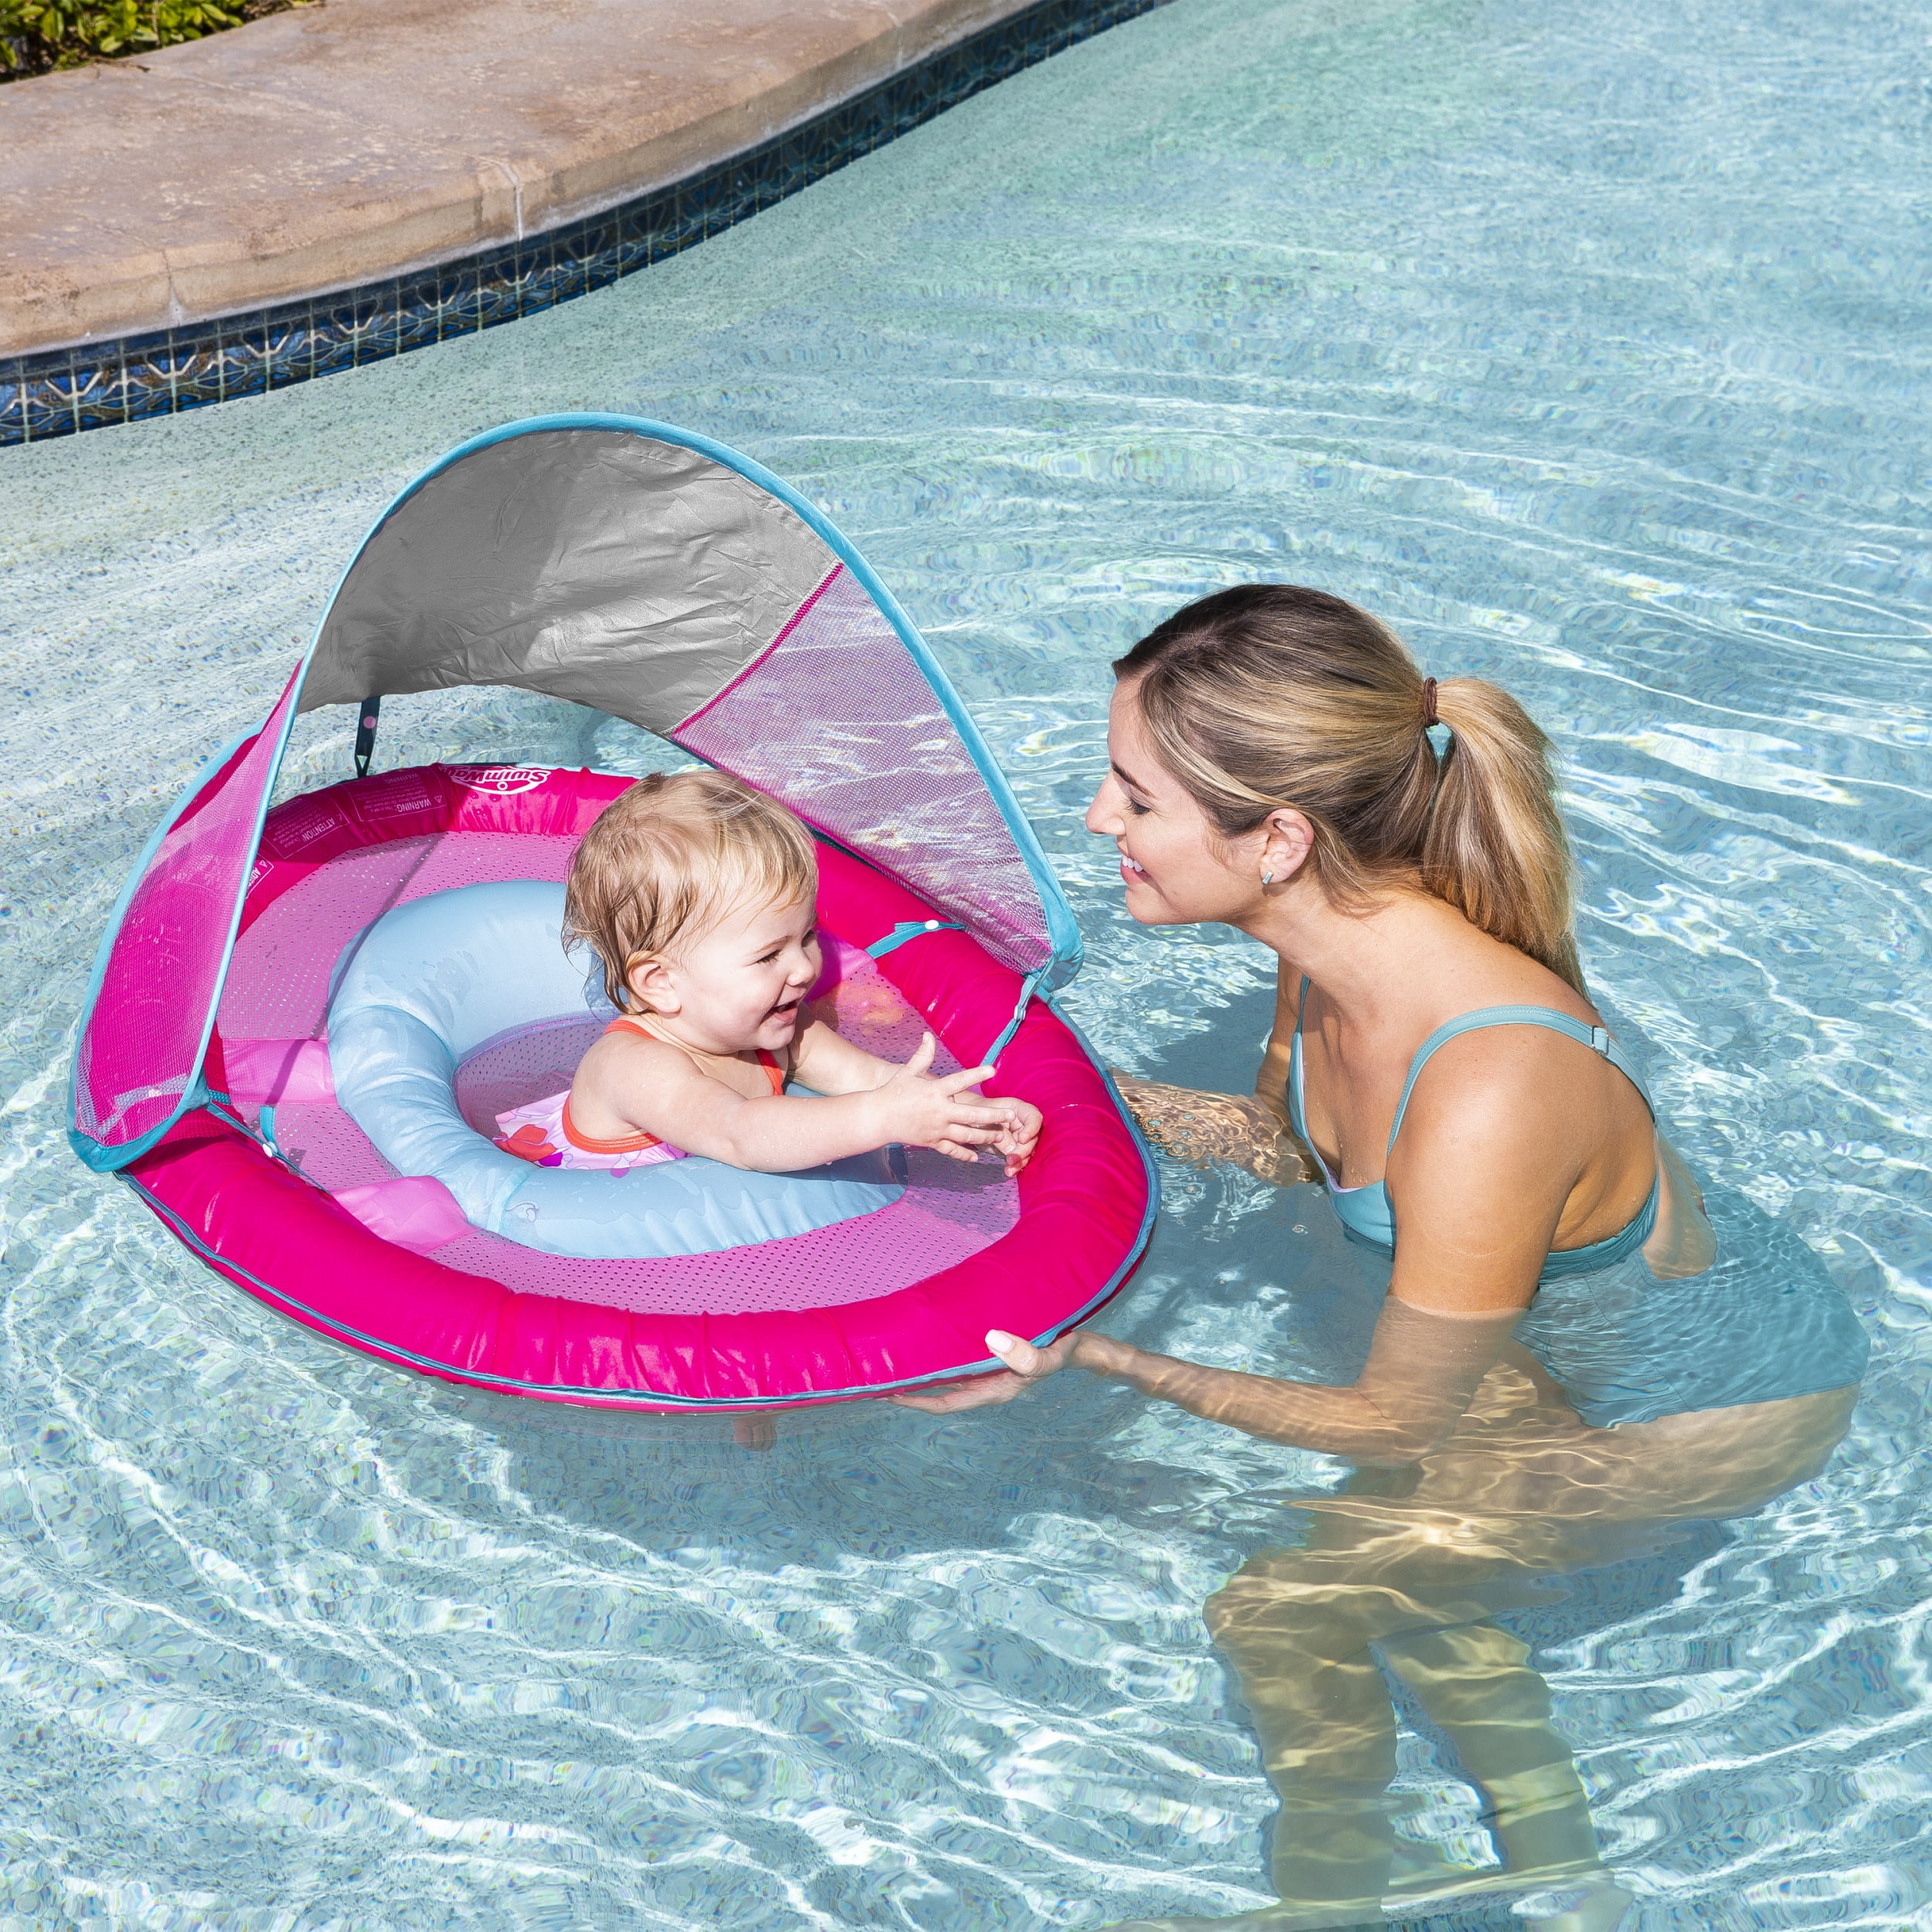 Details about   SwimWays Baby Spring Float Sun Canopy Blue Swimming Pool Splash Lounge w Carrier 